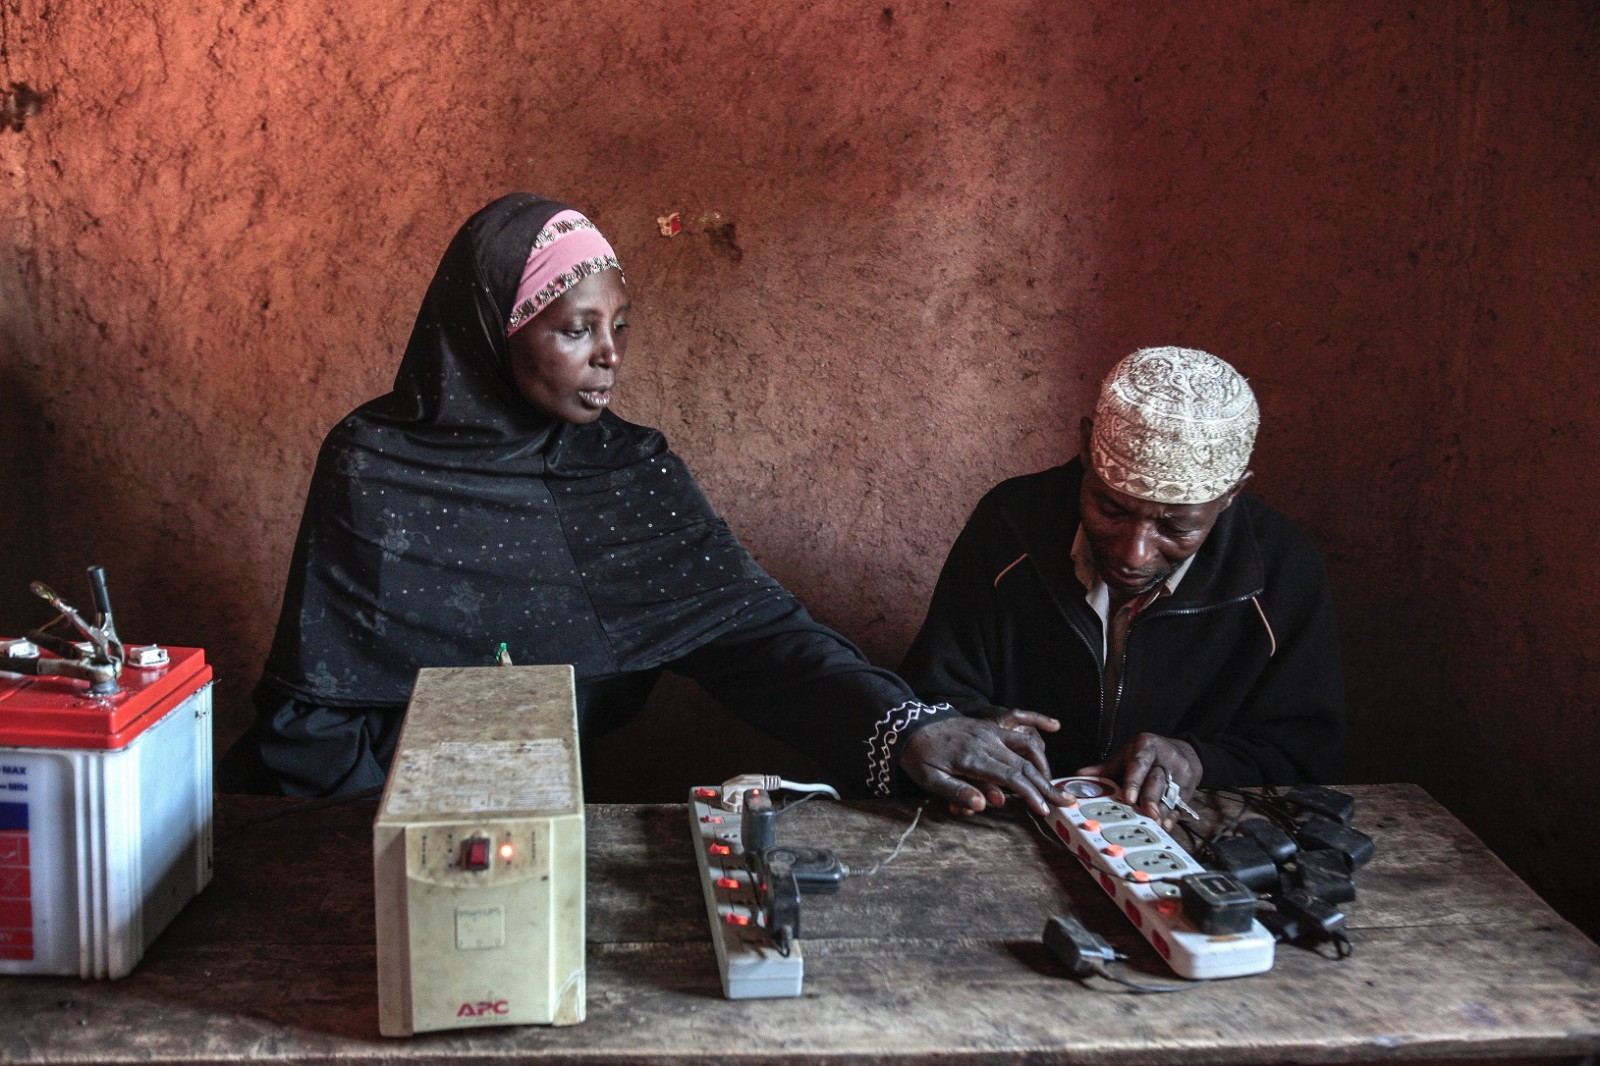 Maida Mushimiyimana | Mobile Phone Charging | Duteranink Unga, Rwanda. Man and woman sitting at a table with two batteries, electrical sockets and phone chargers.